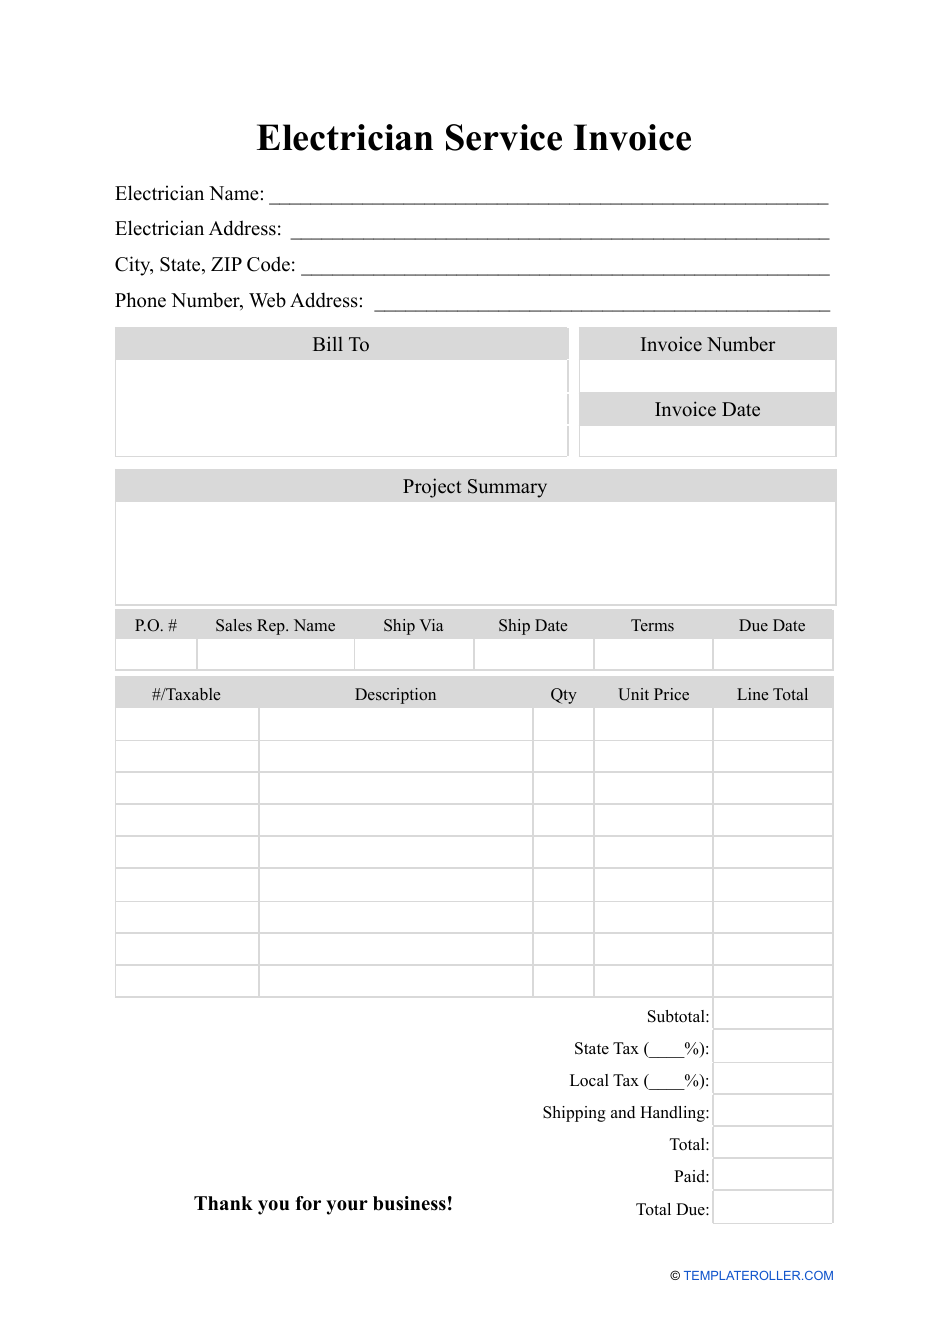 Electrician Service Invoice Template, Page 1